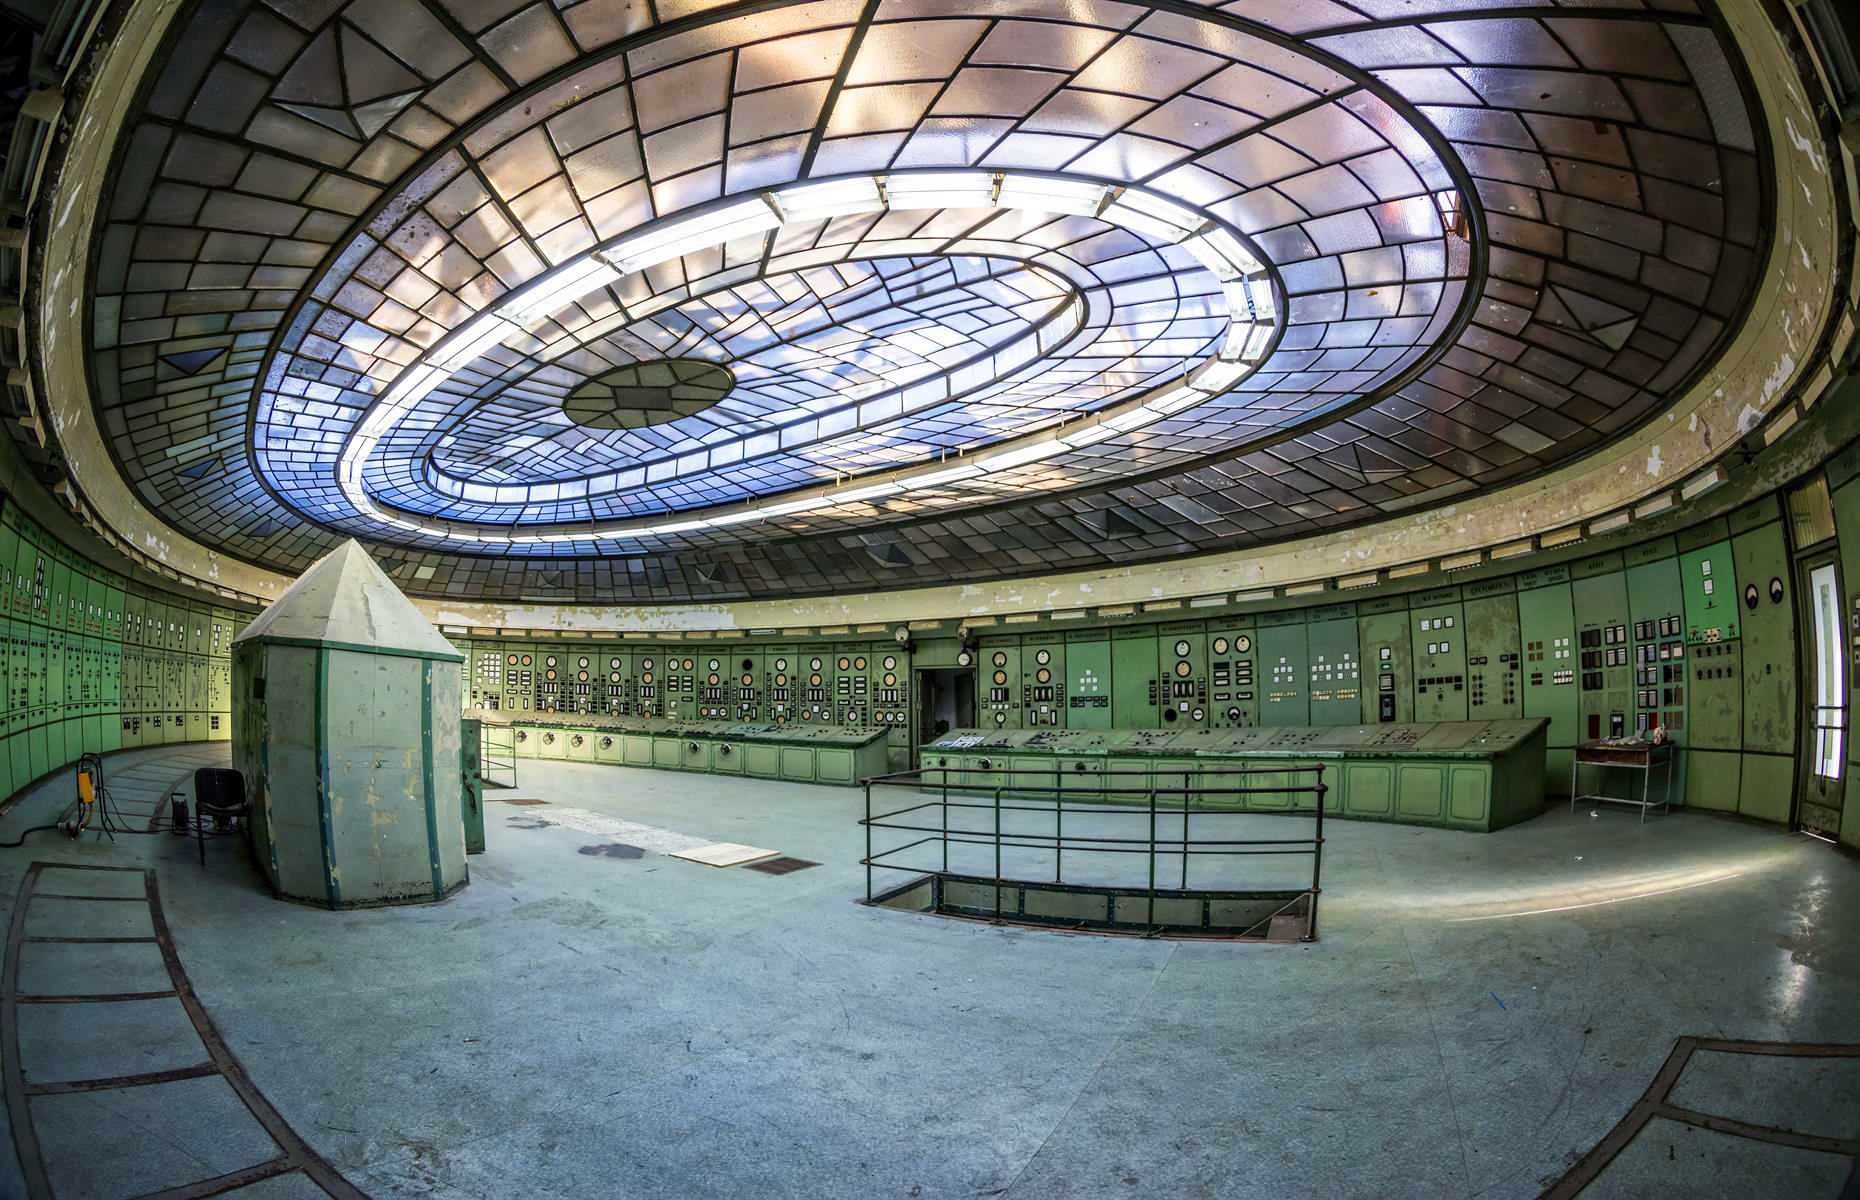 Intriguing deserted spaces from around the globe